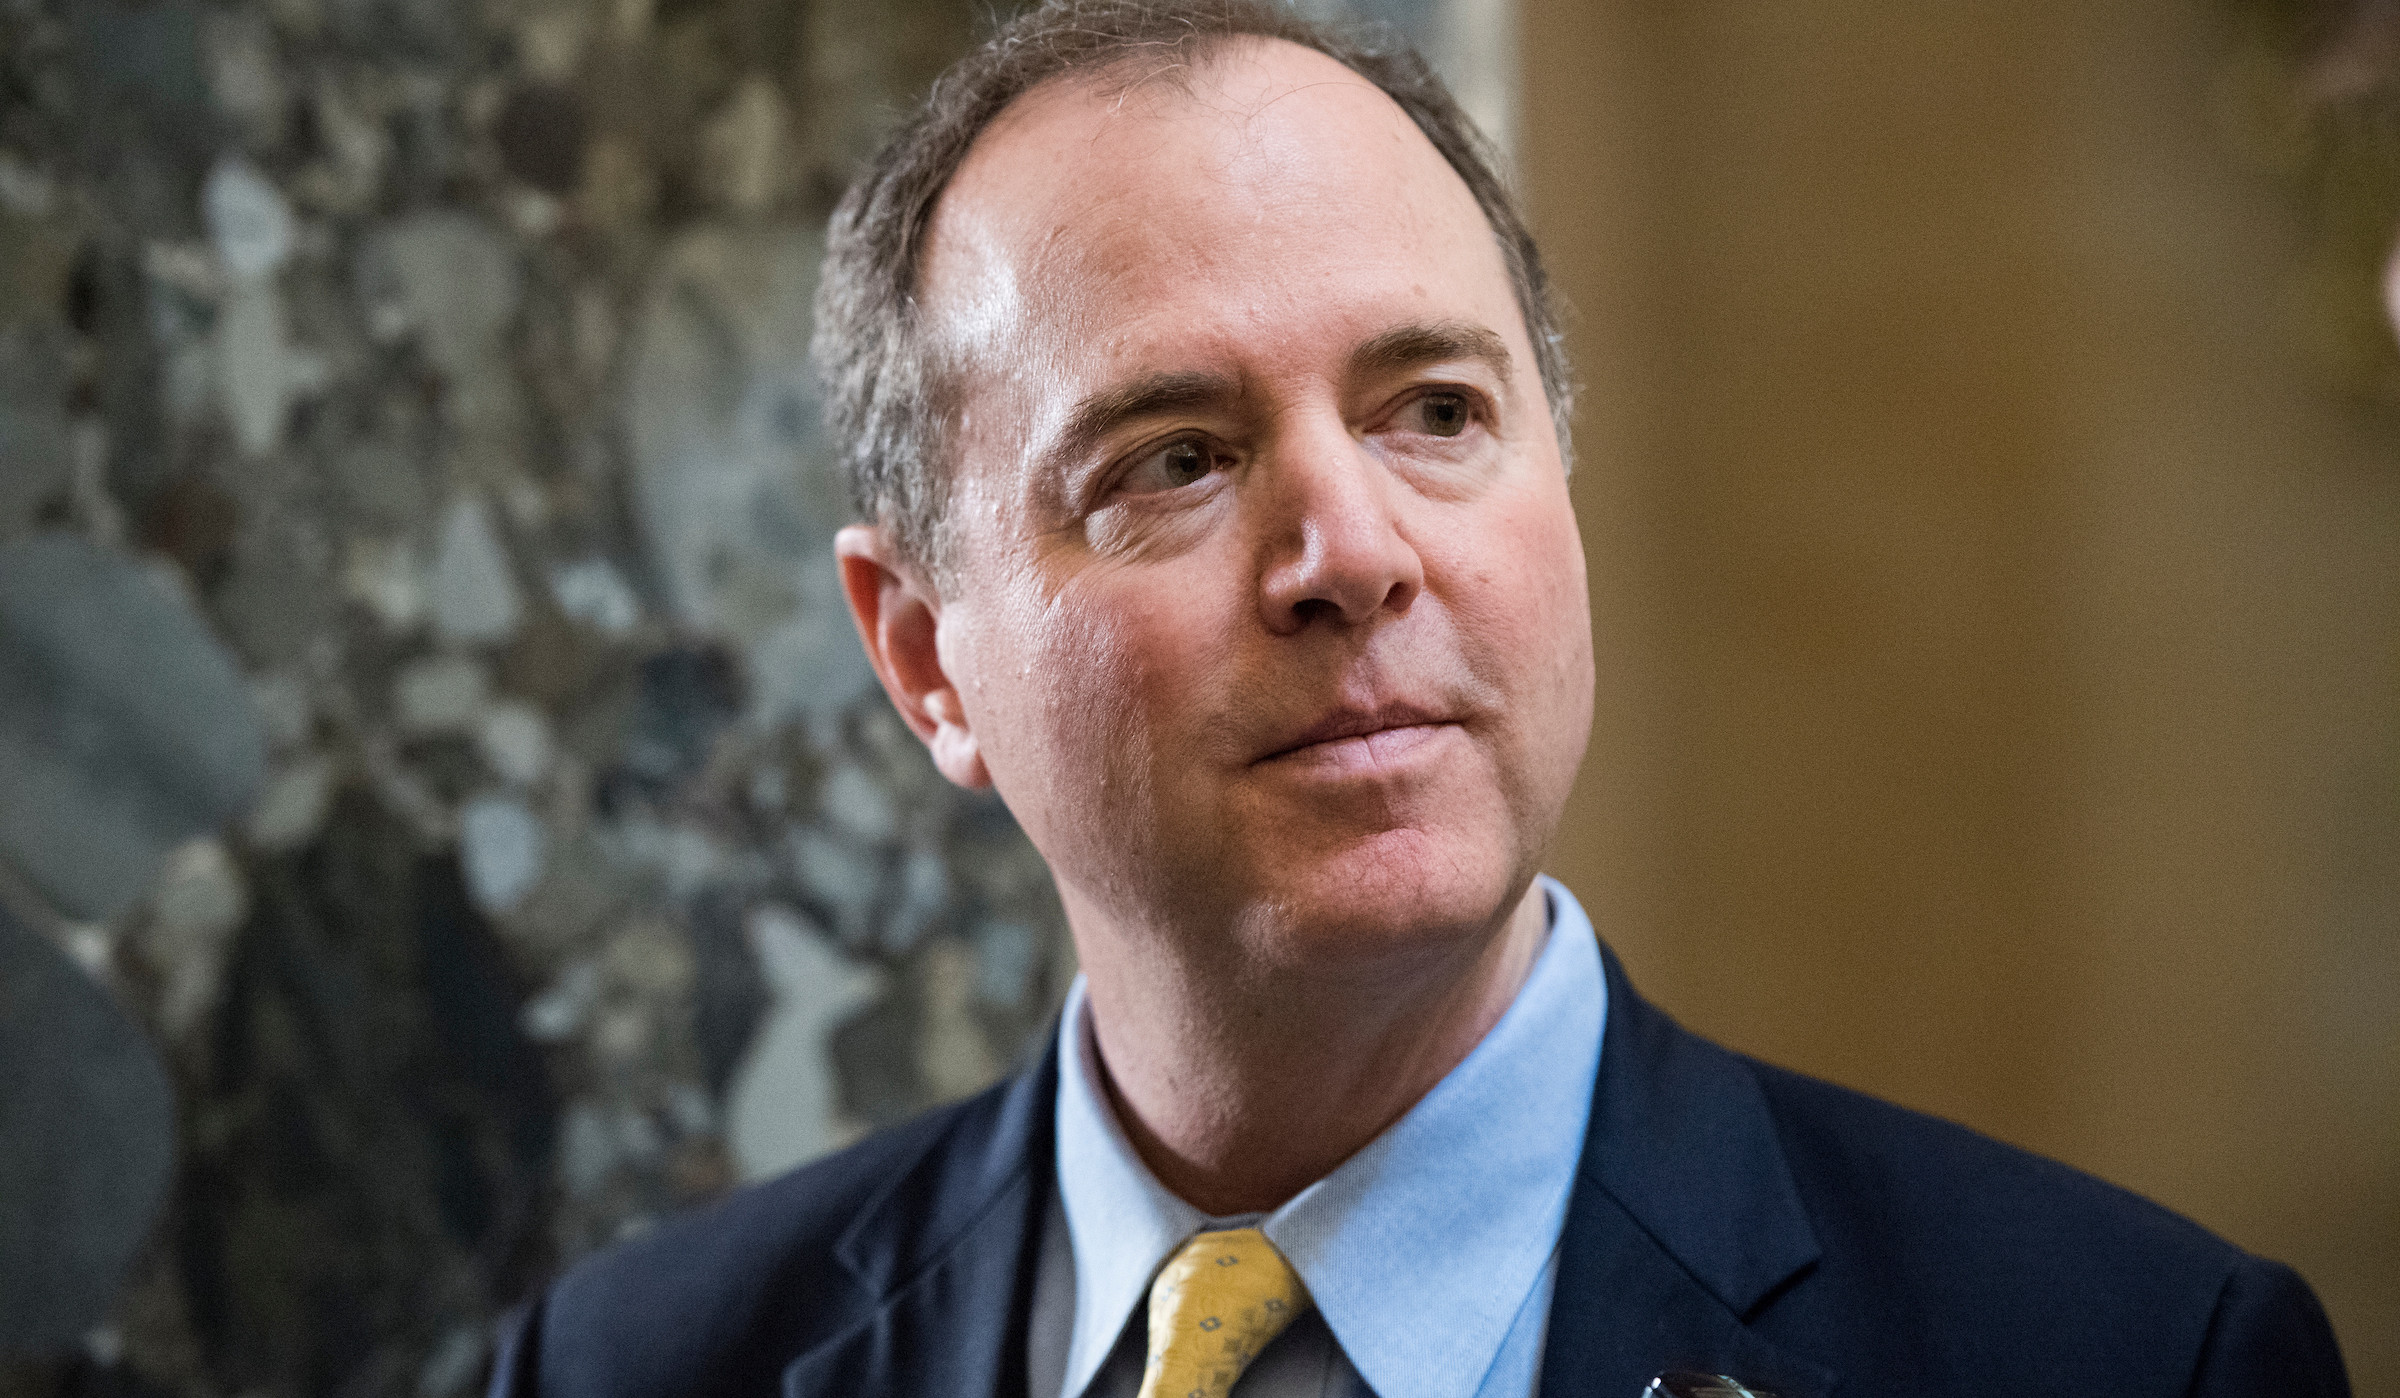 We must further strengthen and support democracy in Armenia and a free, independent Artsakh: Adam Schiff